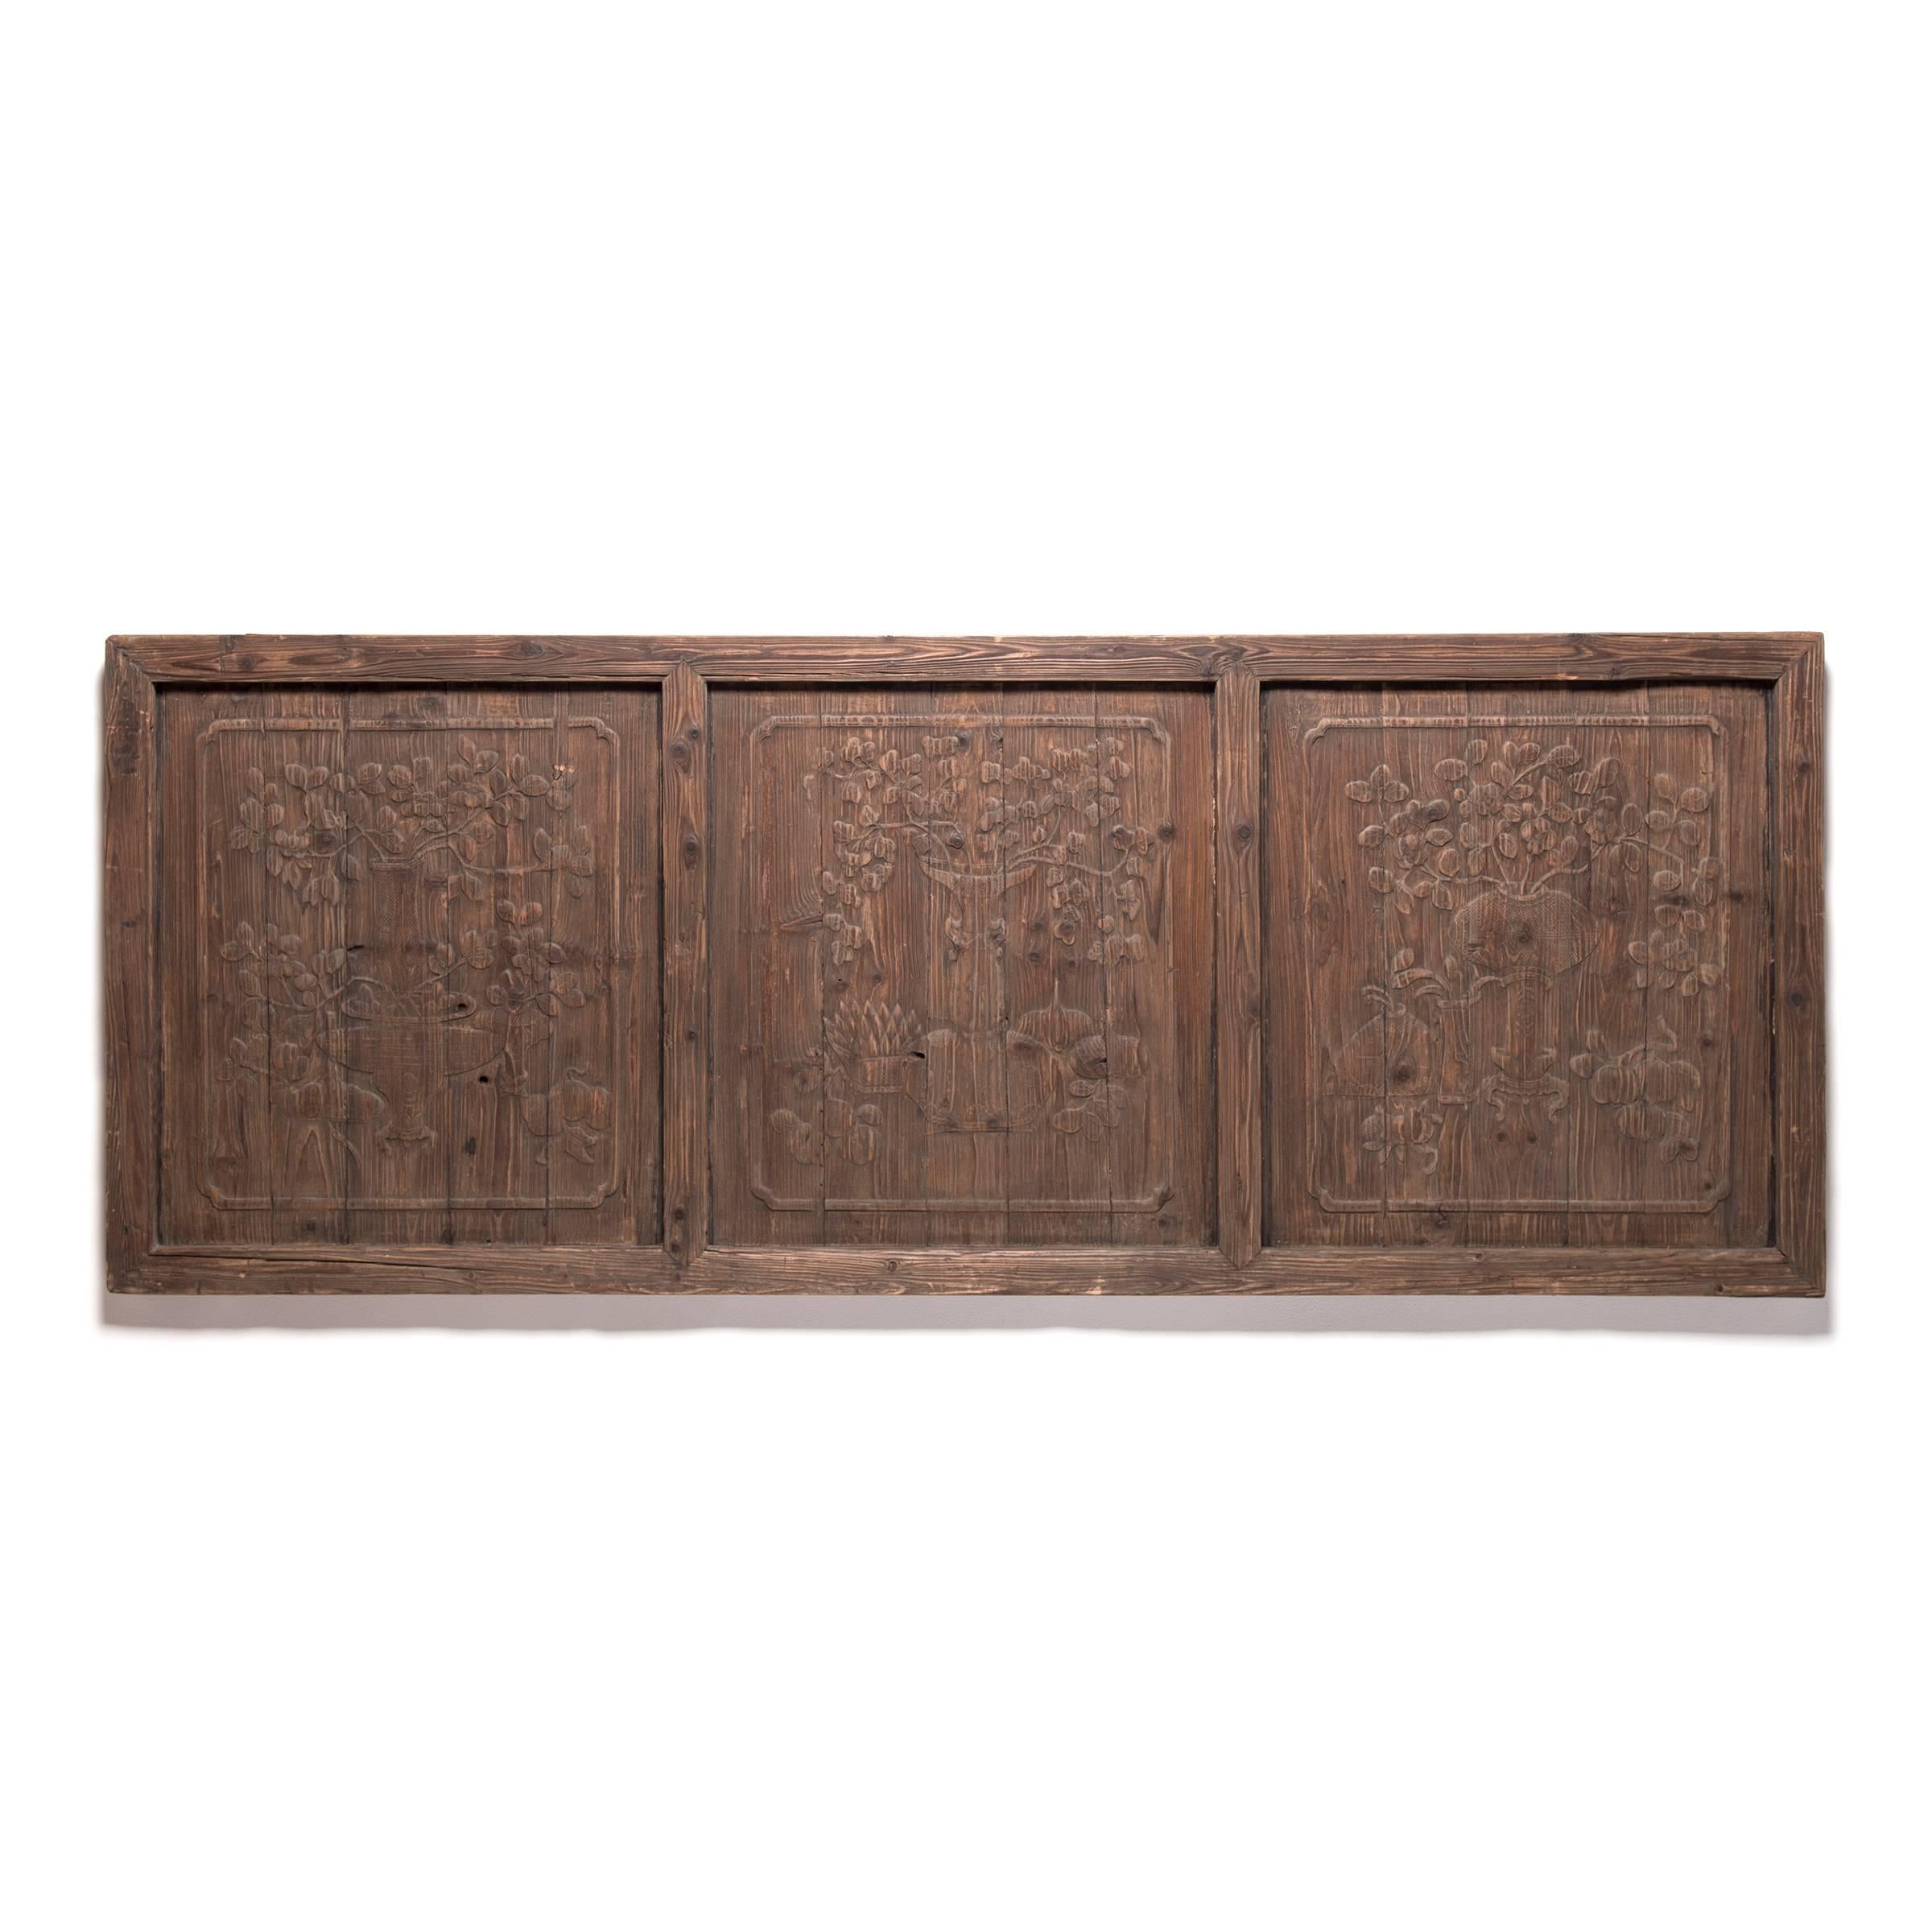 Chinese Relief Carved Architectural Panel with Fruit and Flora, c. 1850 For Sale